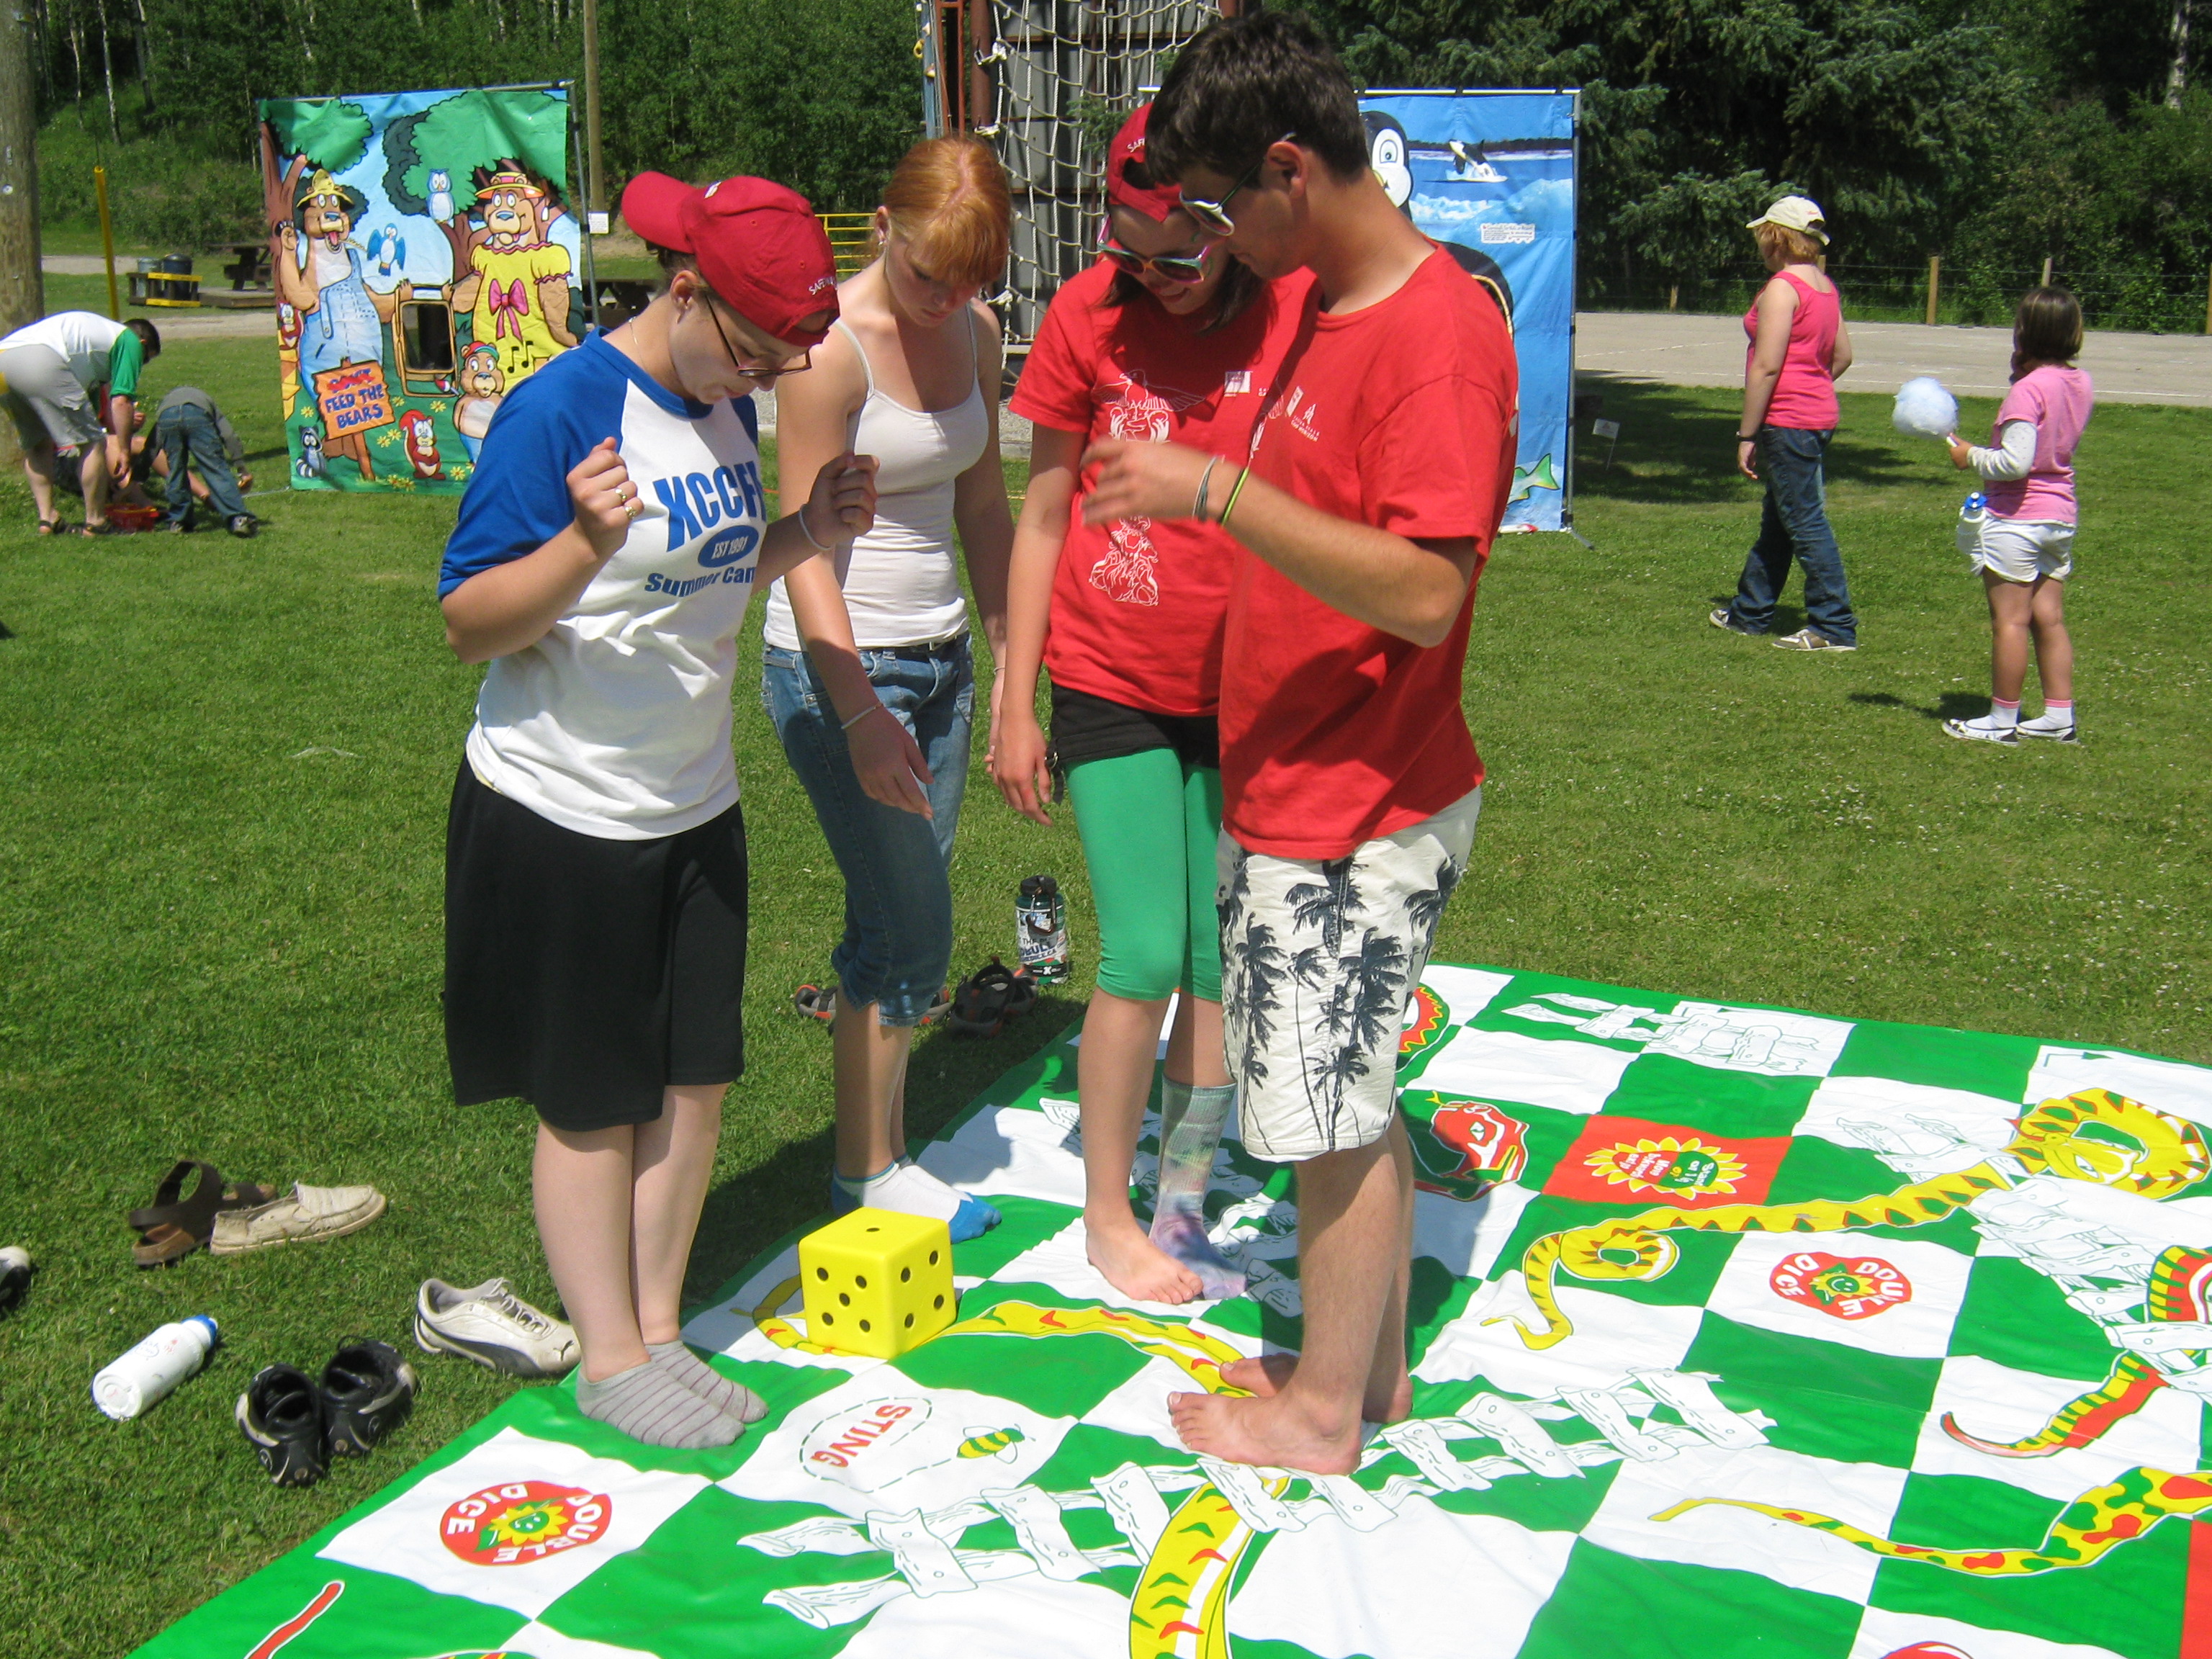 Giant Snakes and Ladders | Carnivals for Kids at Heart